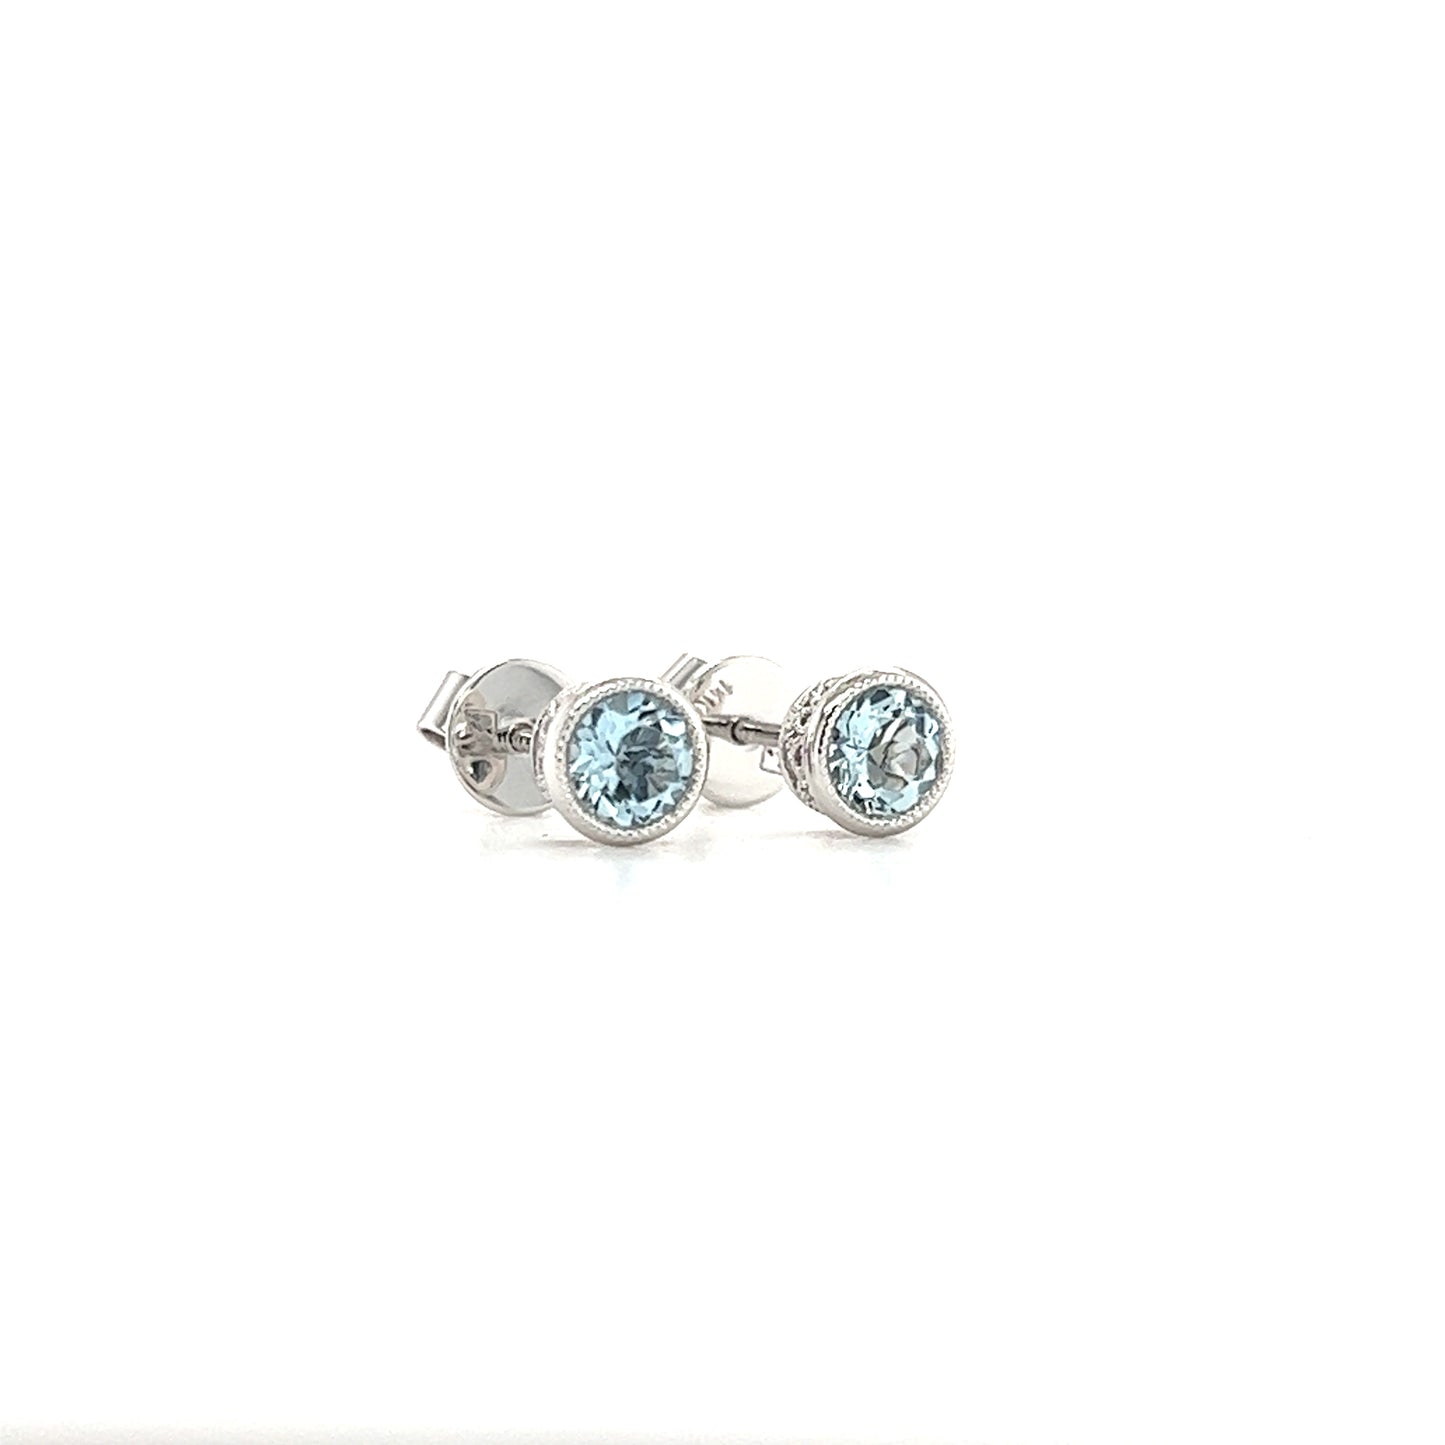 Round Aquamarine Stud Earrings with Filigree and Milgrain in 14K White Gold Left Side View